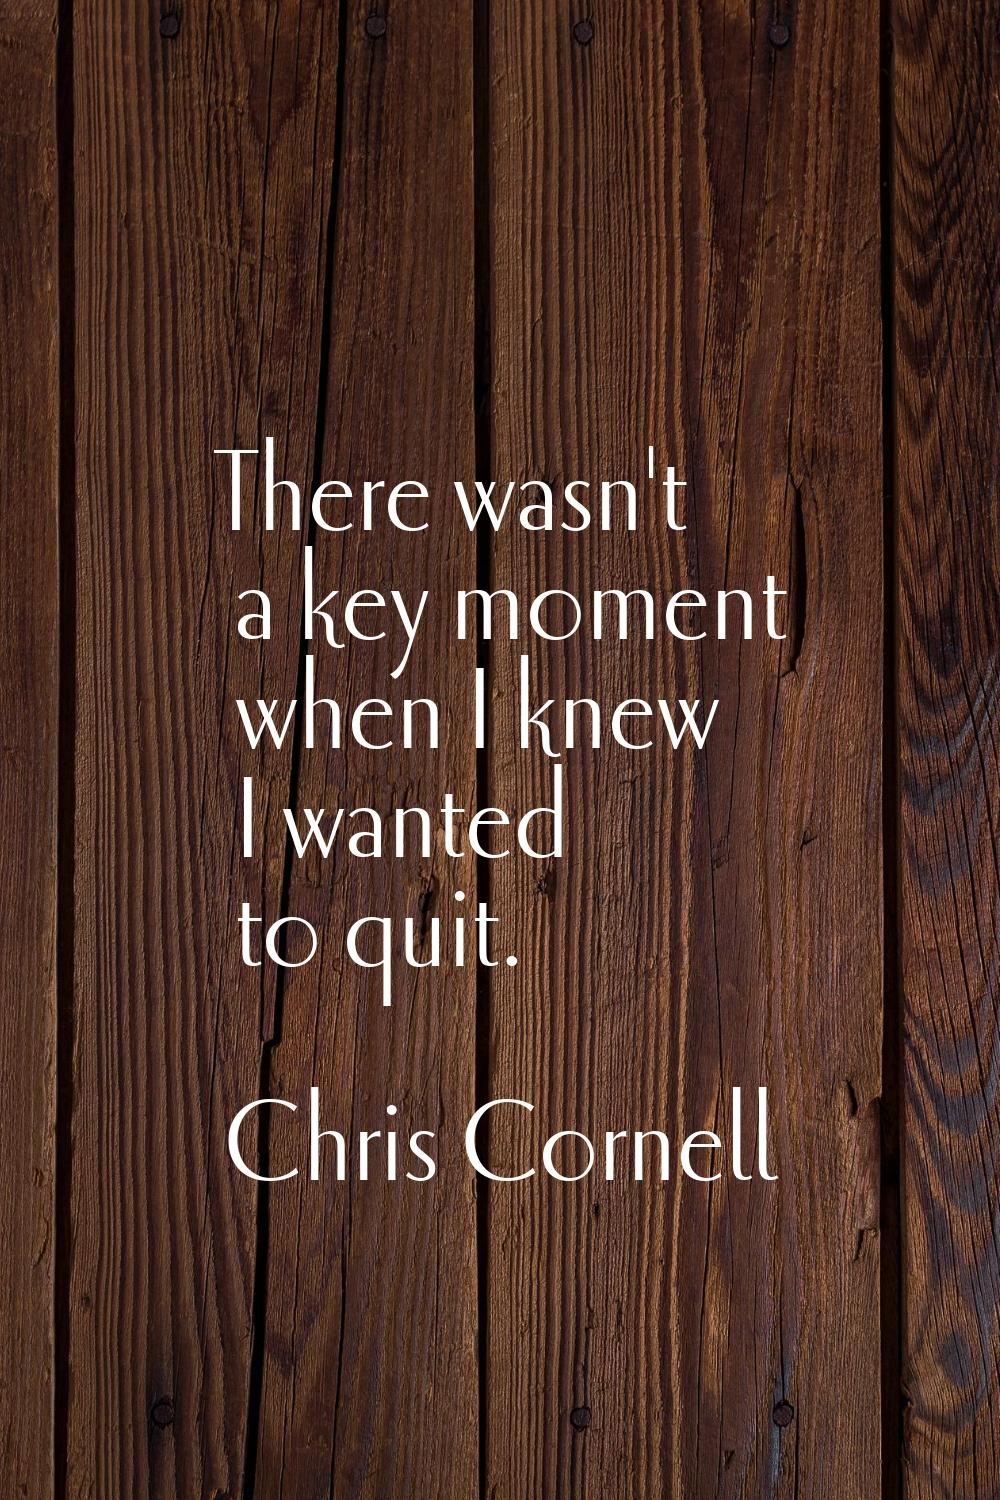 There wasn't a key moment when I knew I wanted to quit.